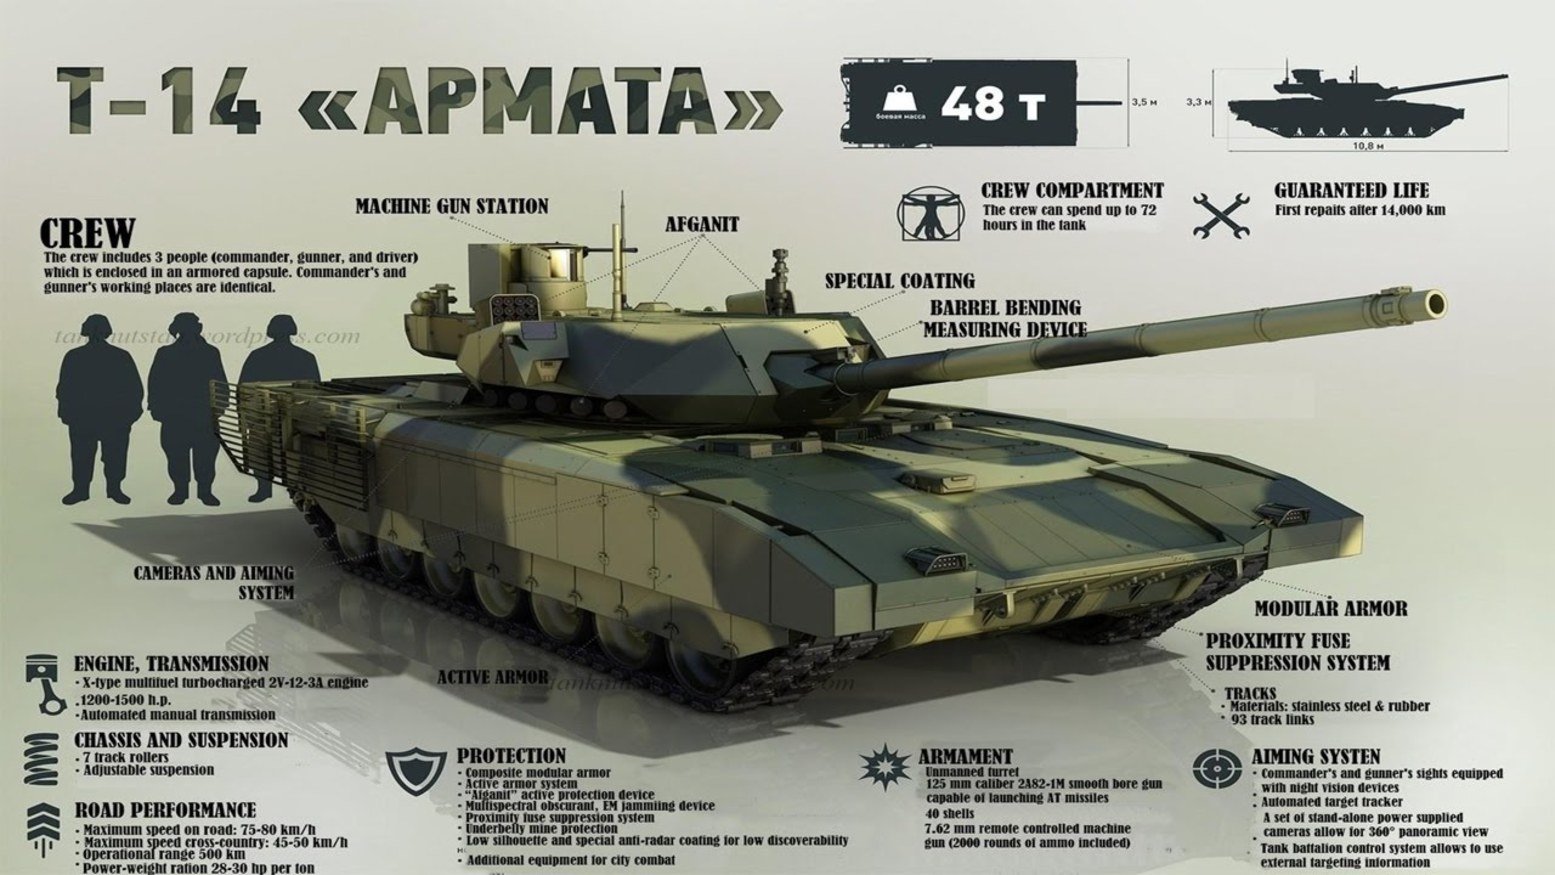 Forget the Armata: Could Russia's T-95 Tank Be Better Choice? | The National Interest